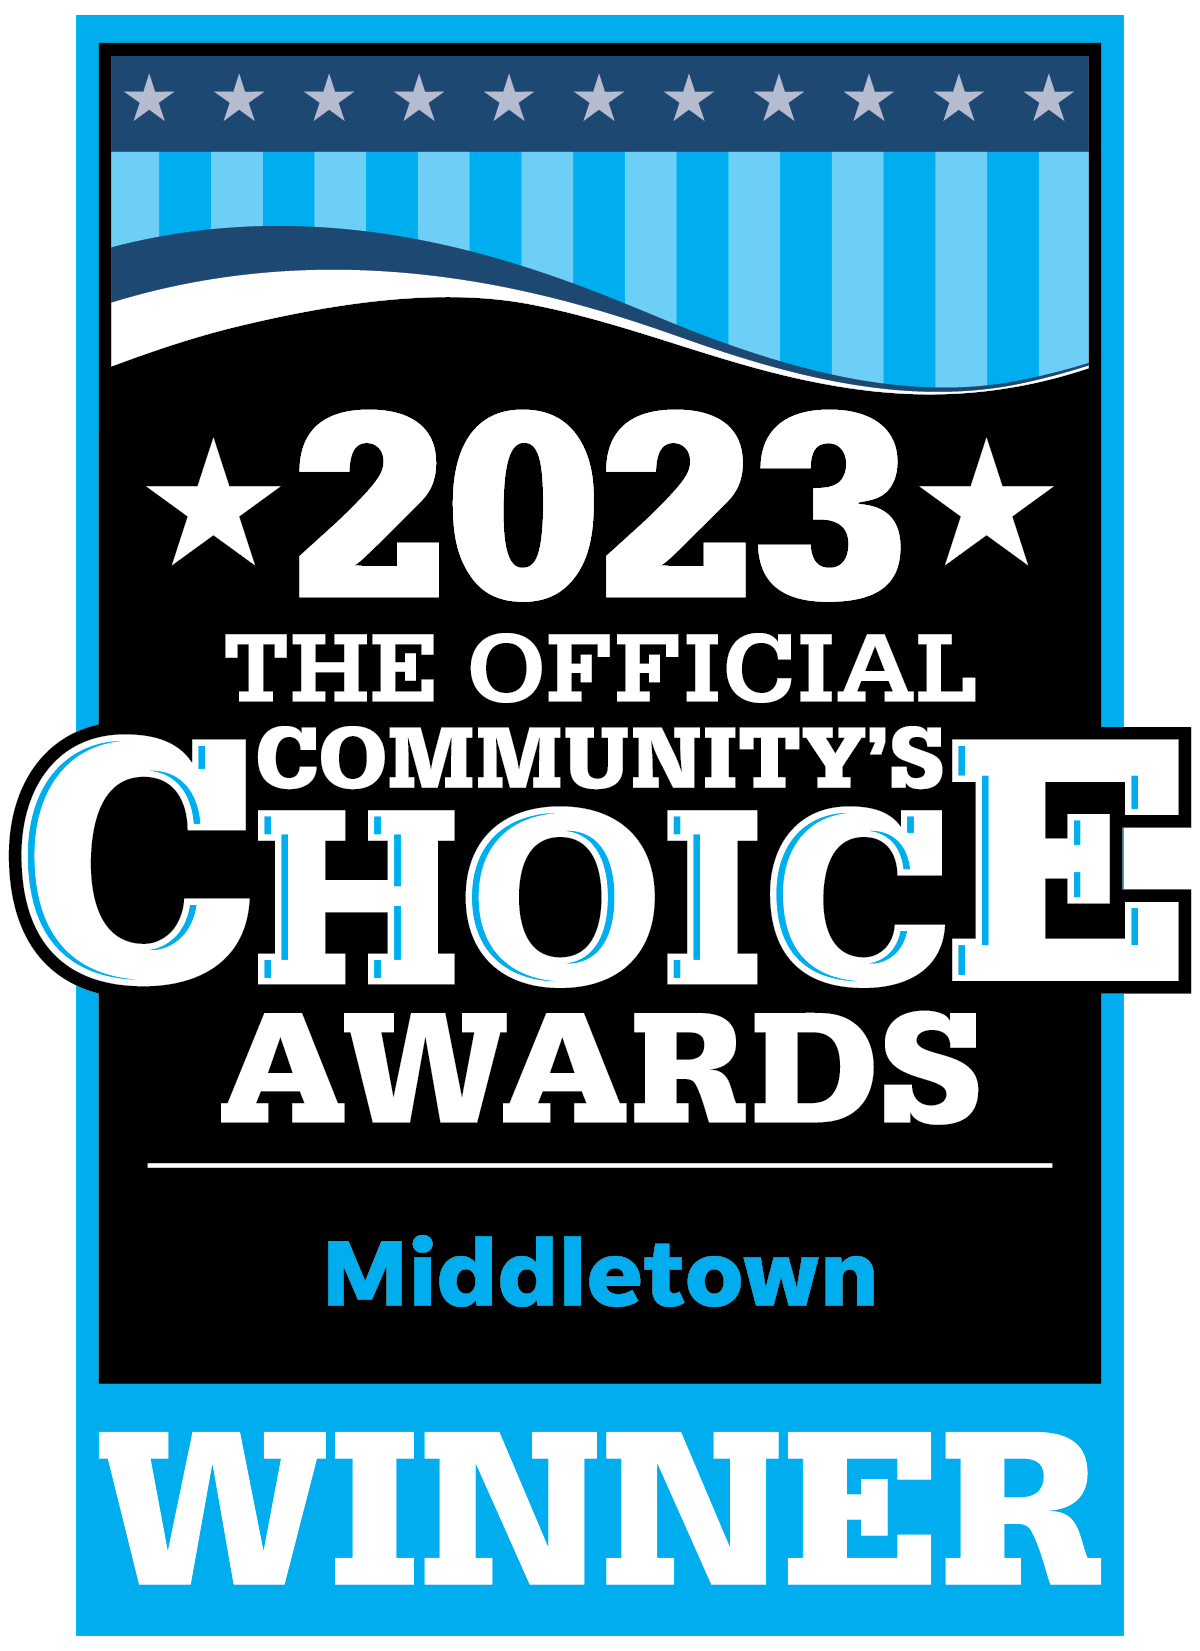 Healey Brothers Honored as Best Pre-Owned Vehicle Dealer by Hudson Valley Residents Voting for Community’s Choice Awards